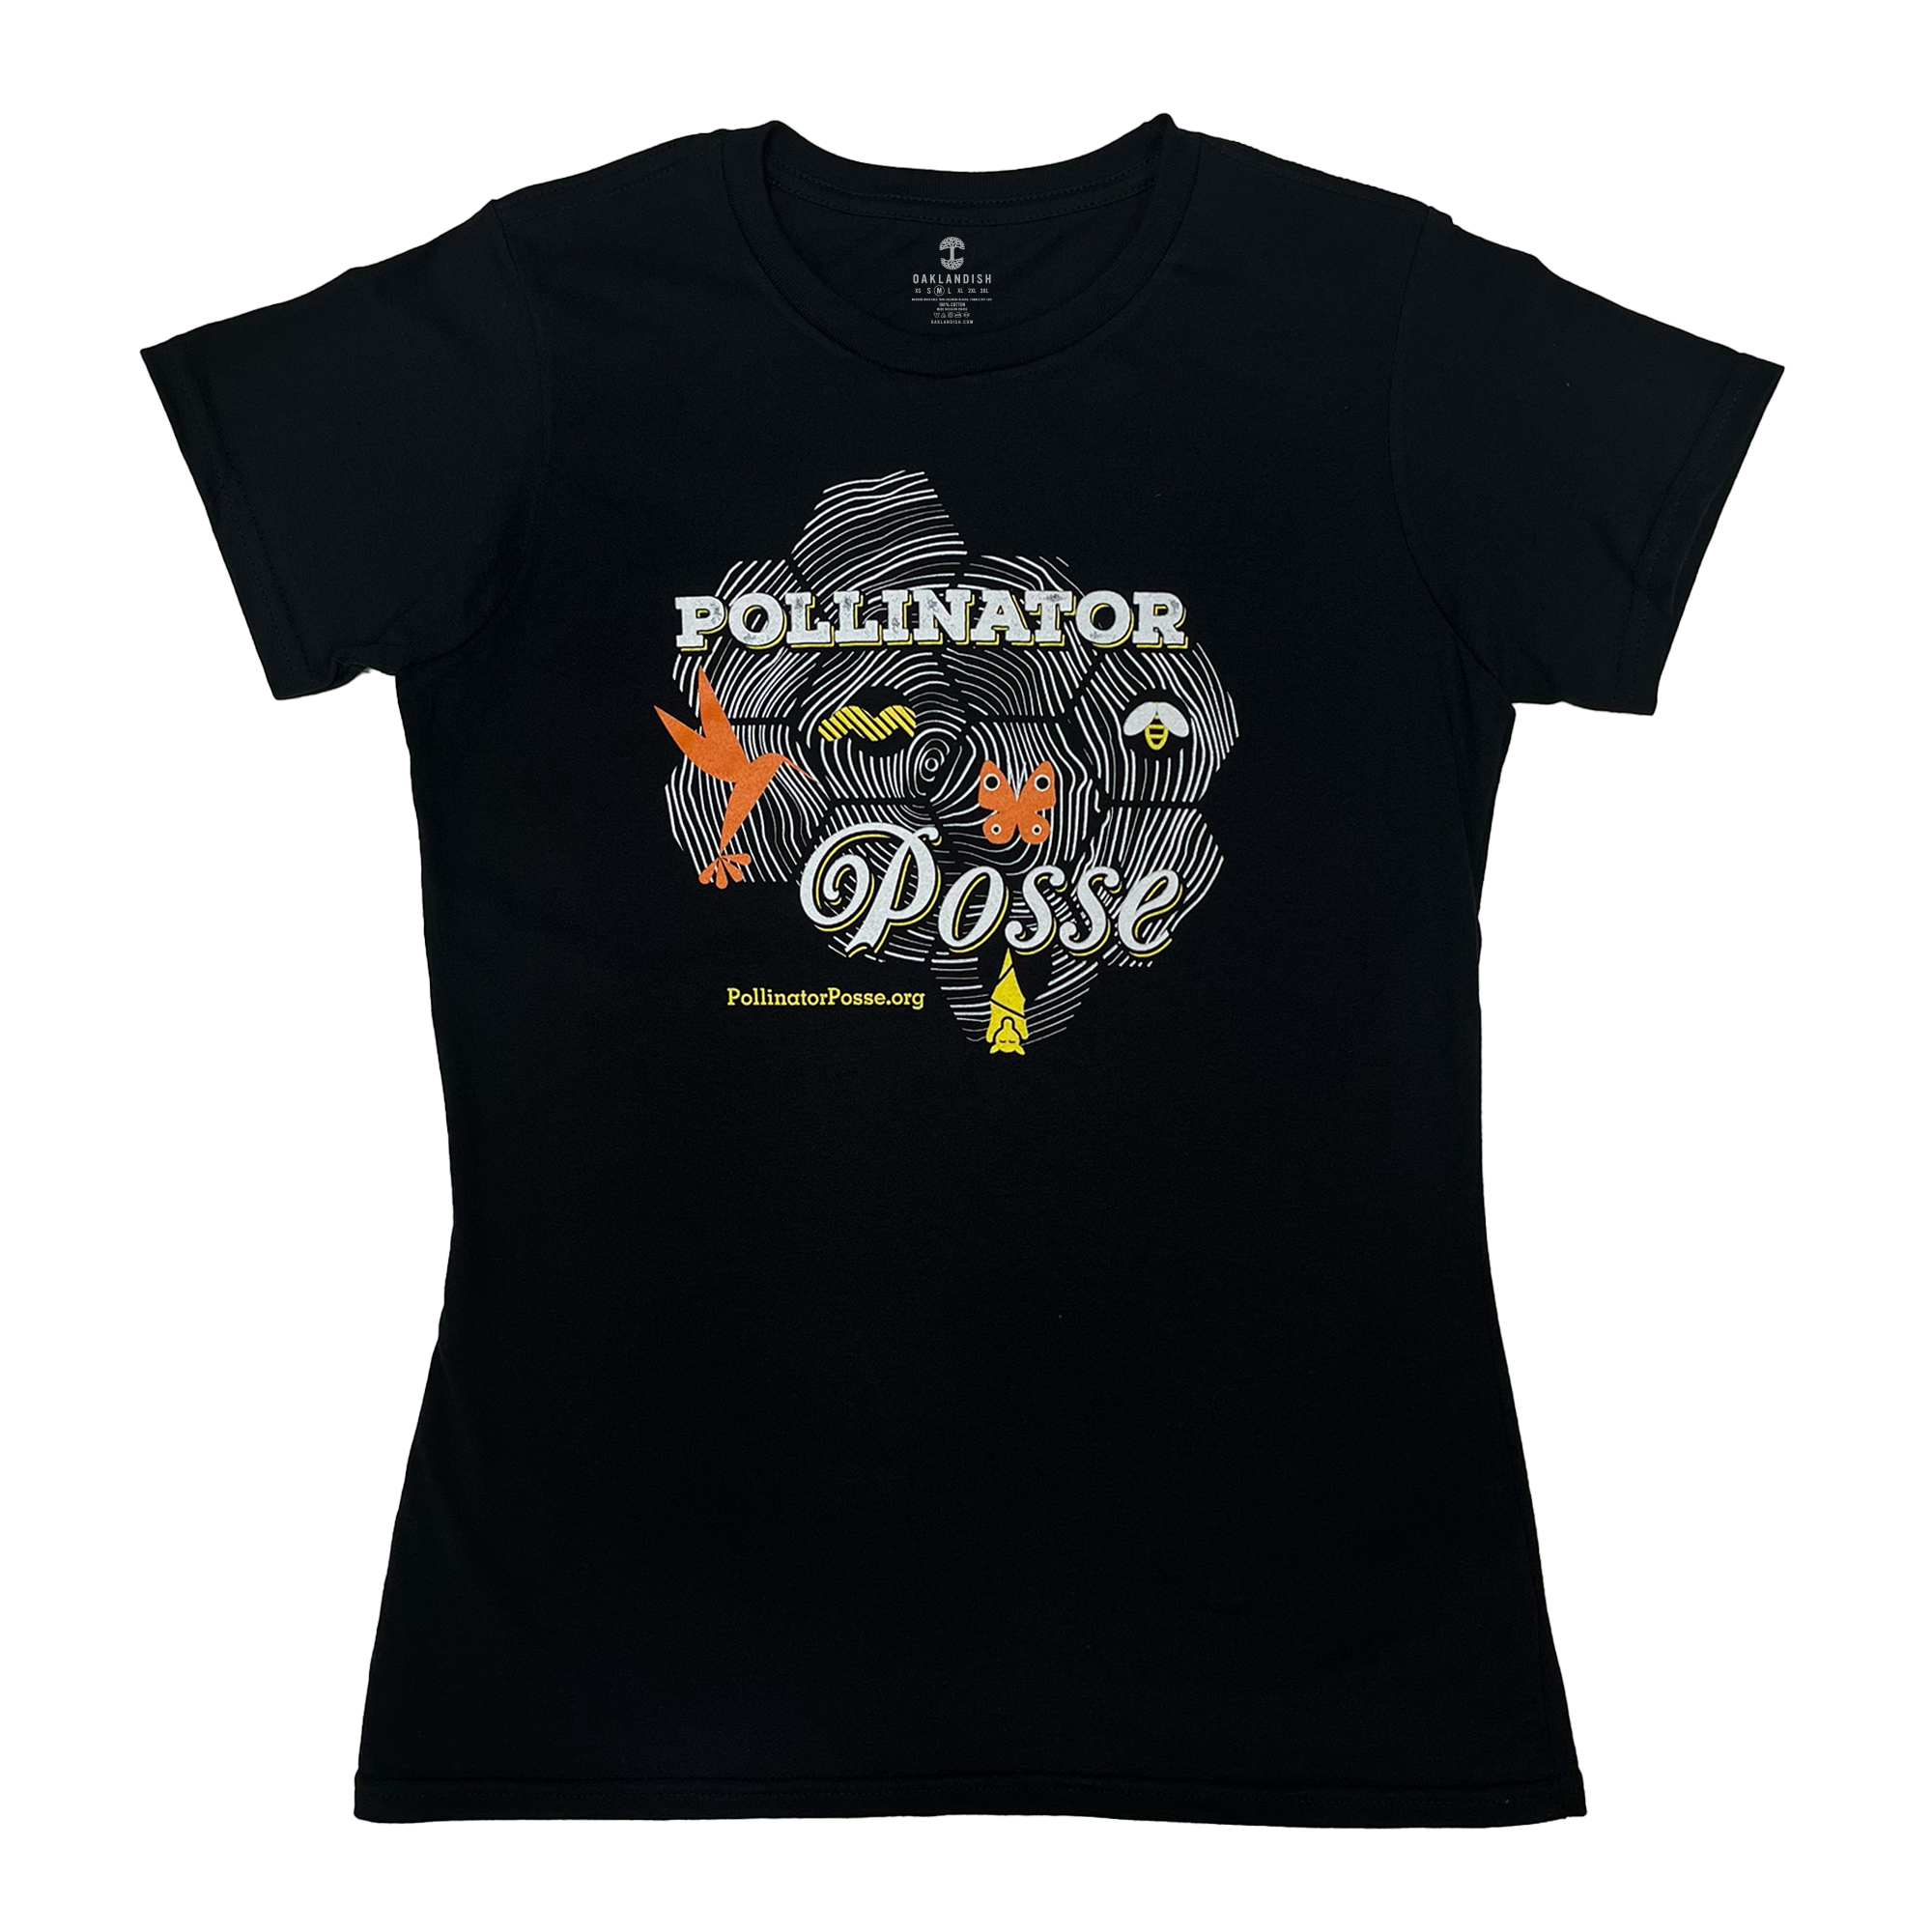 Black women’s t-shirt with bee-themed Pollinator Posse graphic on front chest.